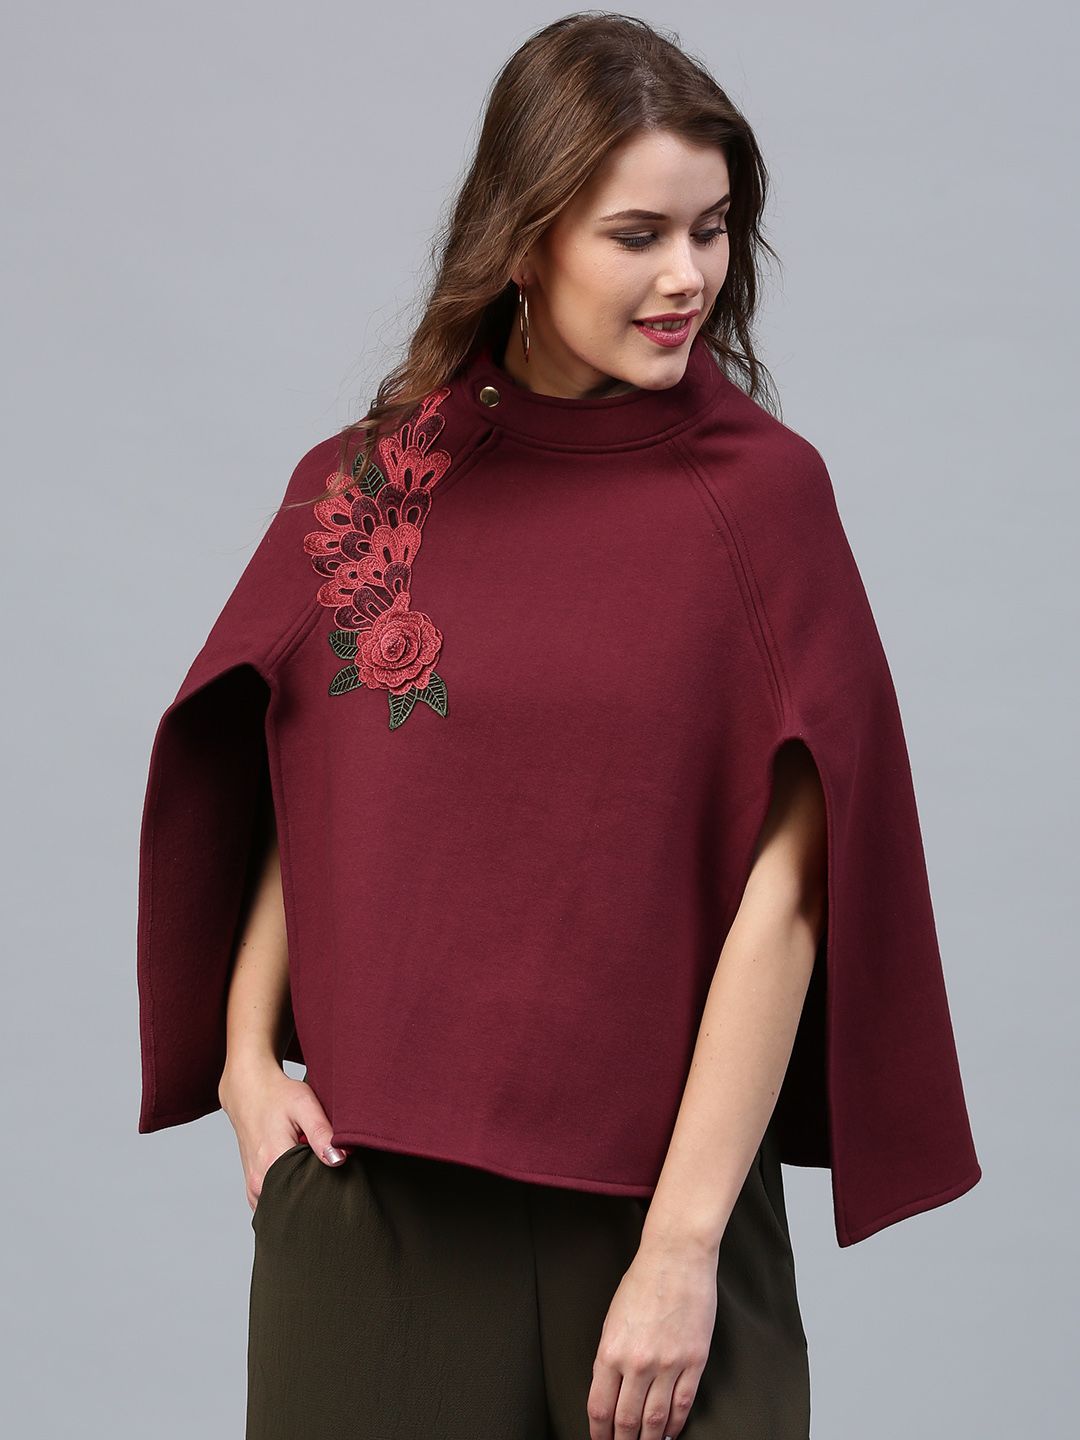 SASSAFRAS Maroon Solid Poncho Shrug with Floral Applique Price in India